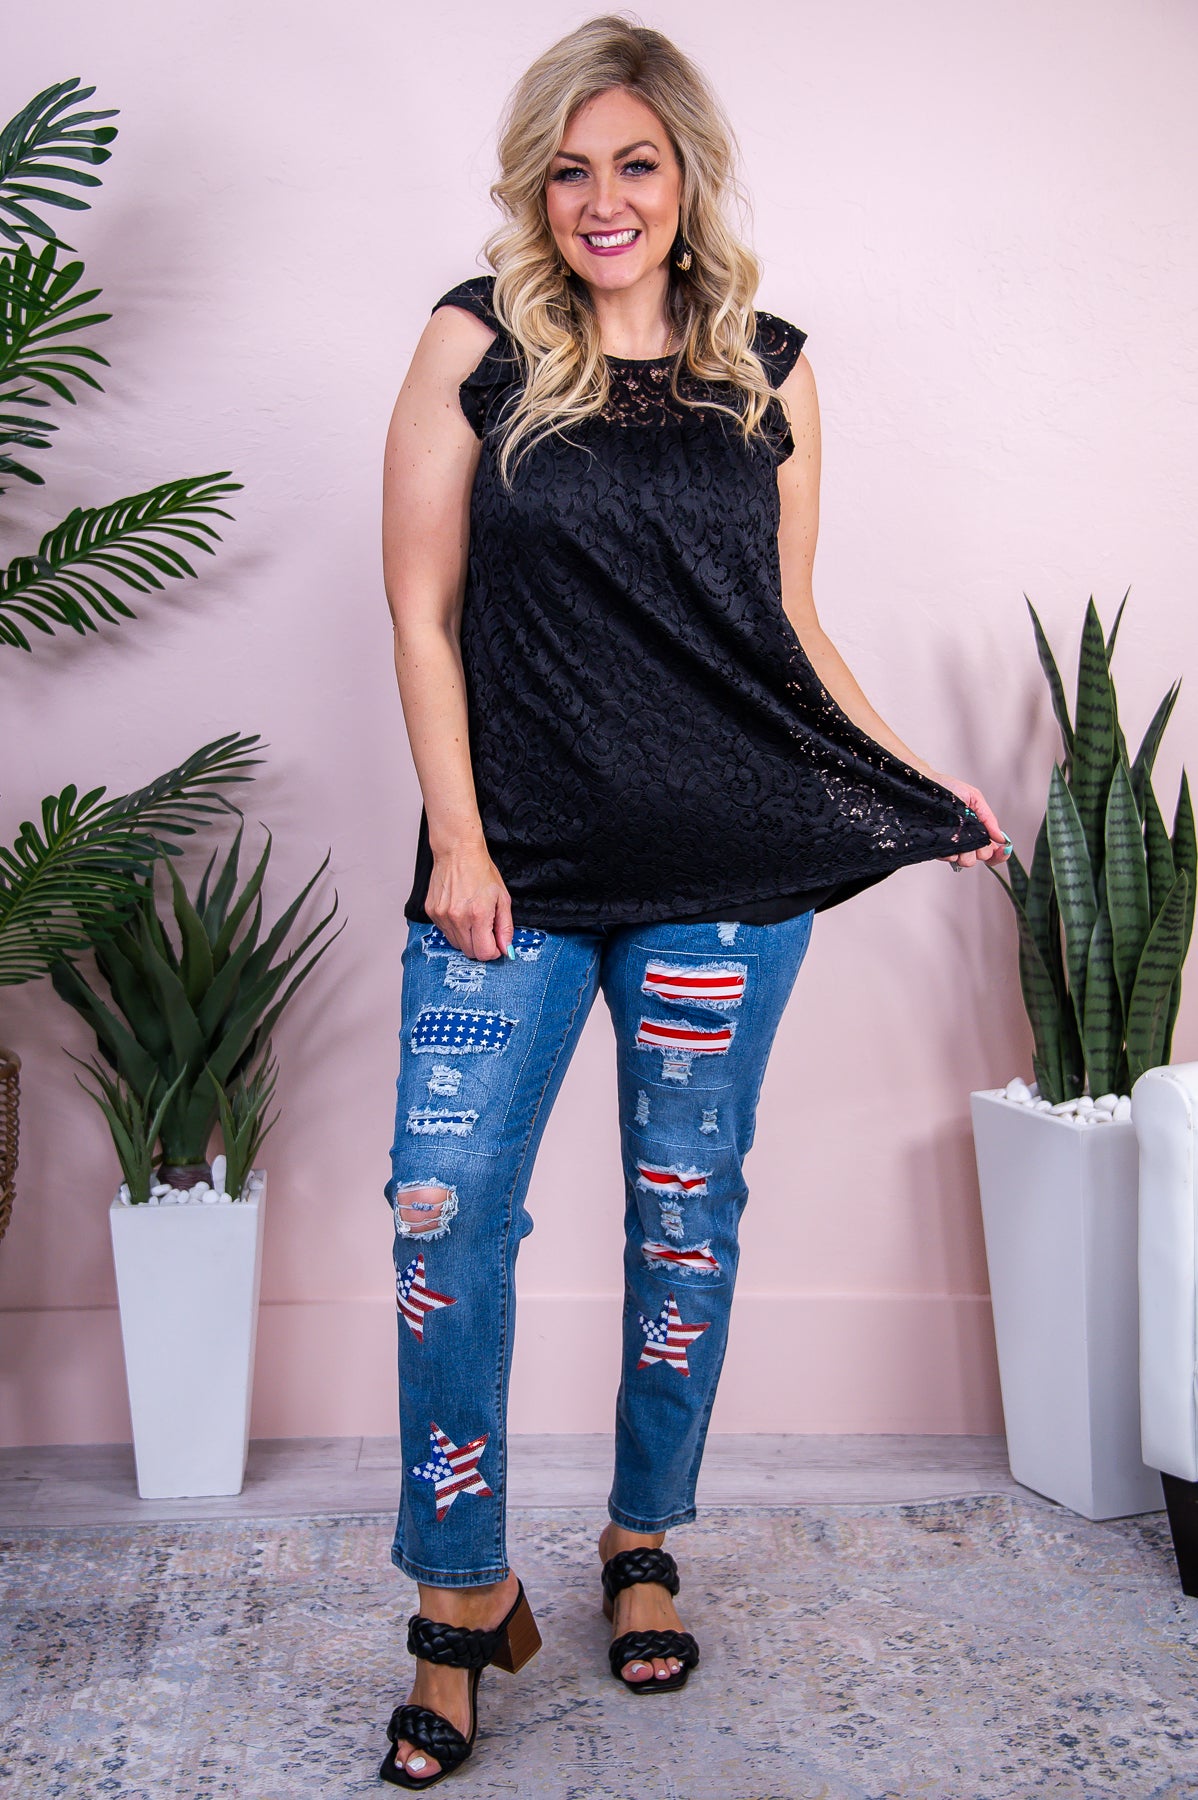 Ripples Of Reflection Black Solid Lace top - T9632BK